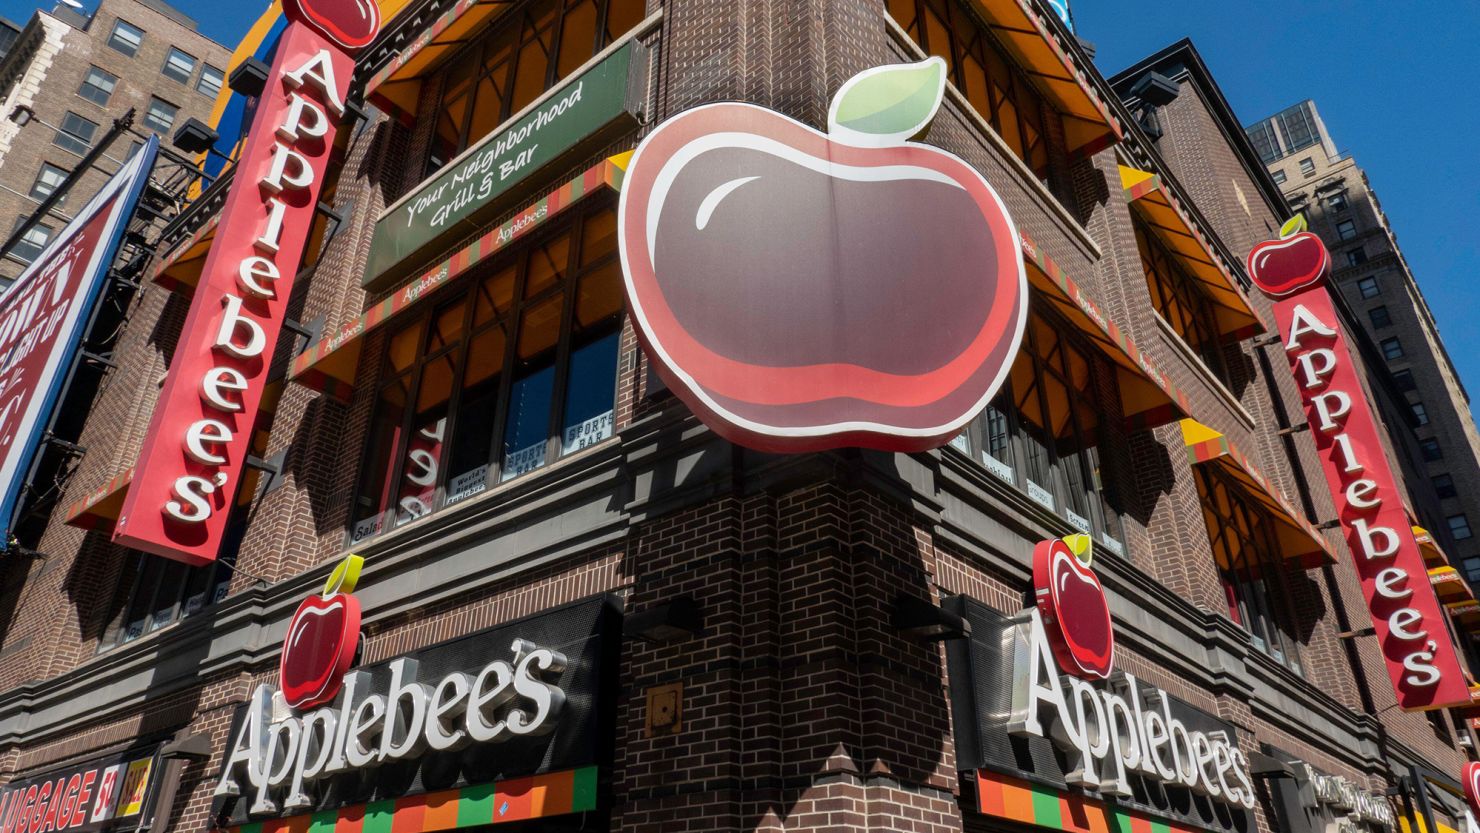 An Applebee's restaurant in Times Square, New York City, in May 2022.